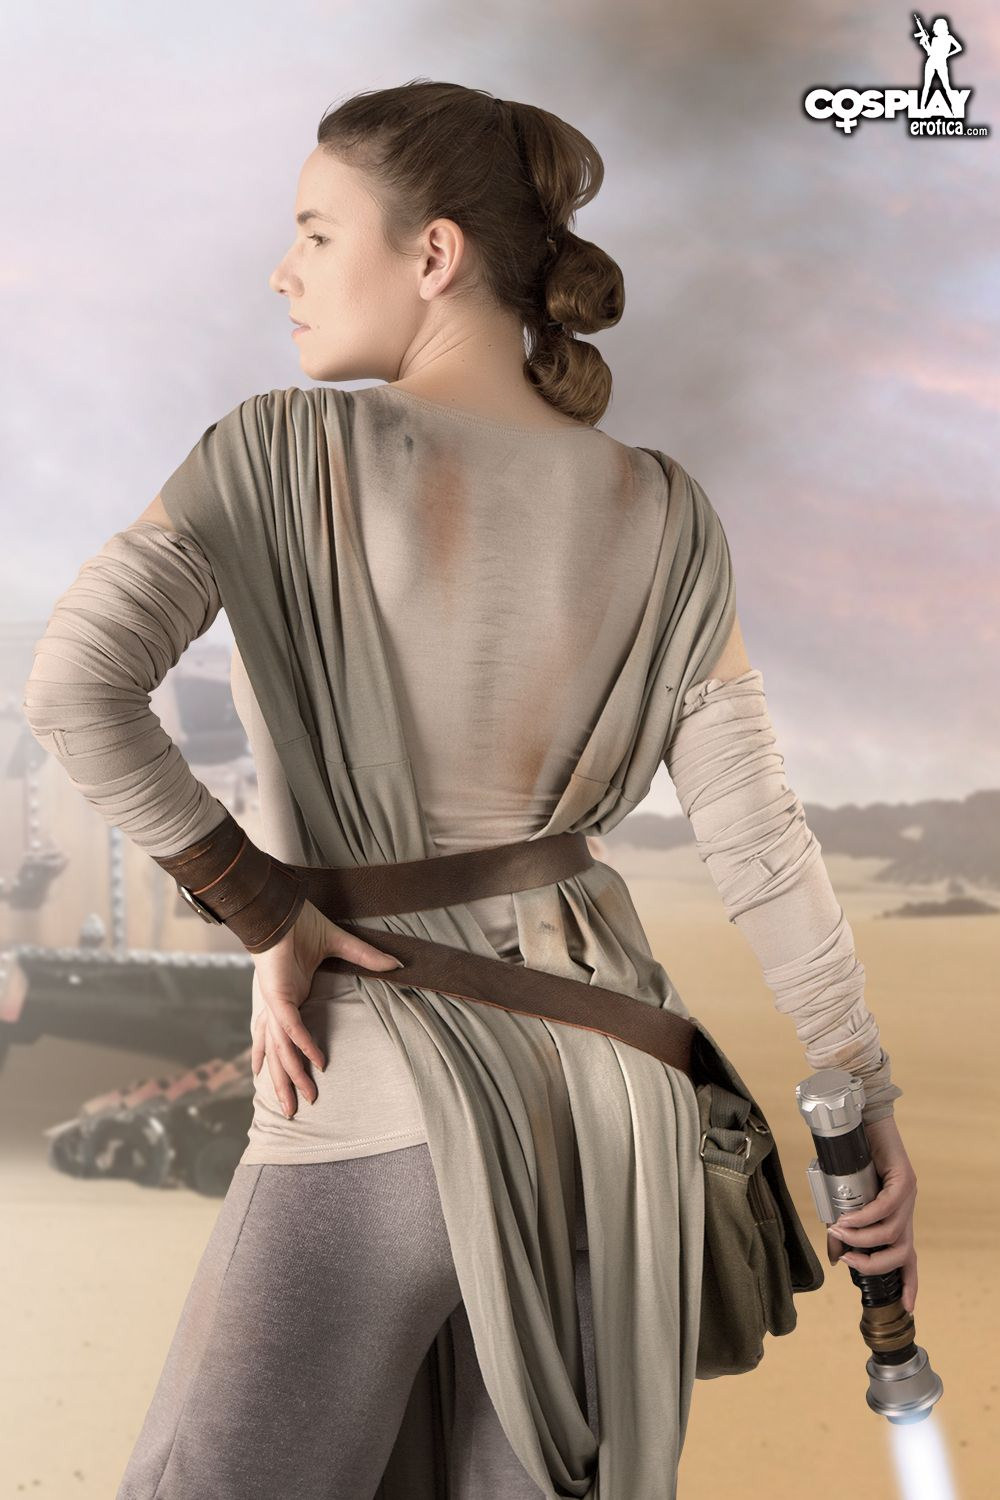 Cassie - Galactic Empire shows free gallery picture 03-0003